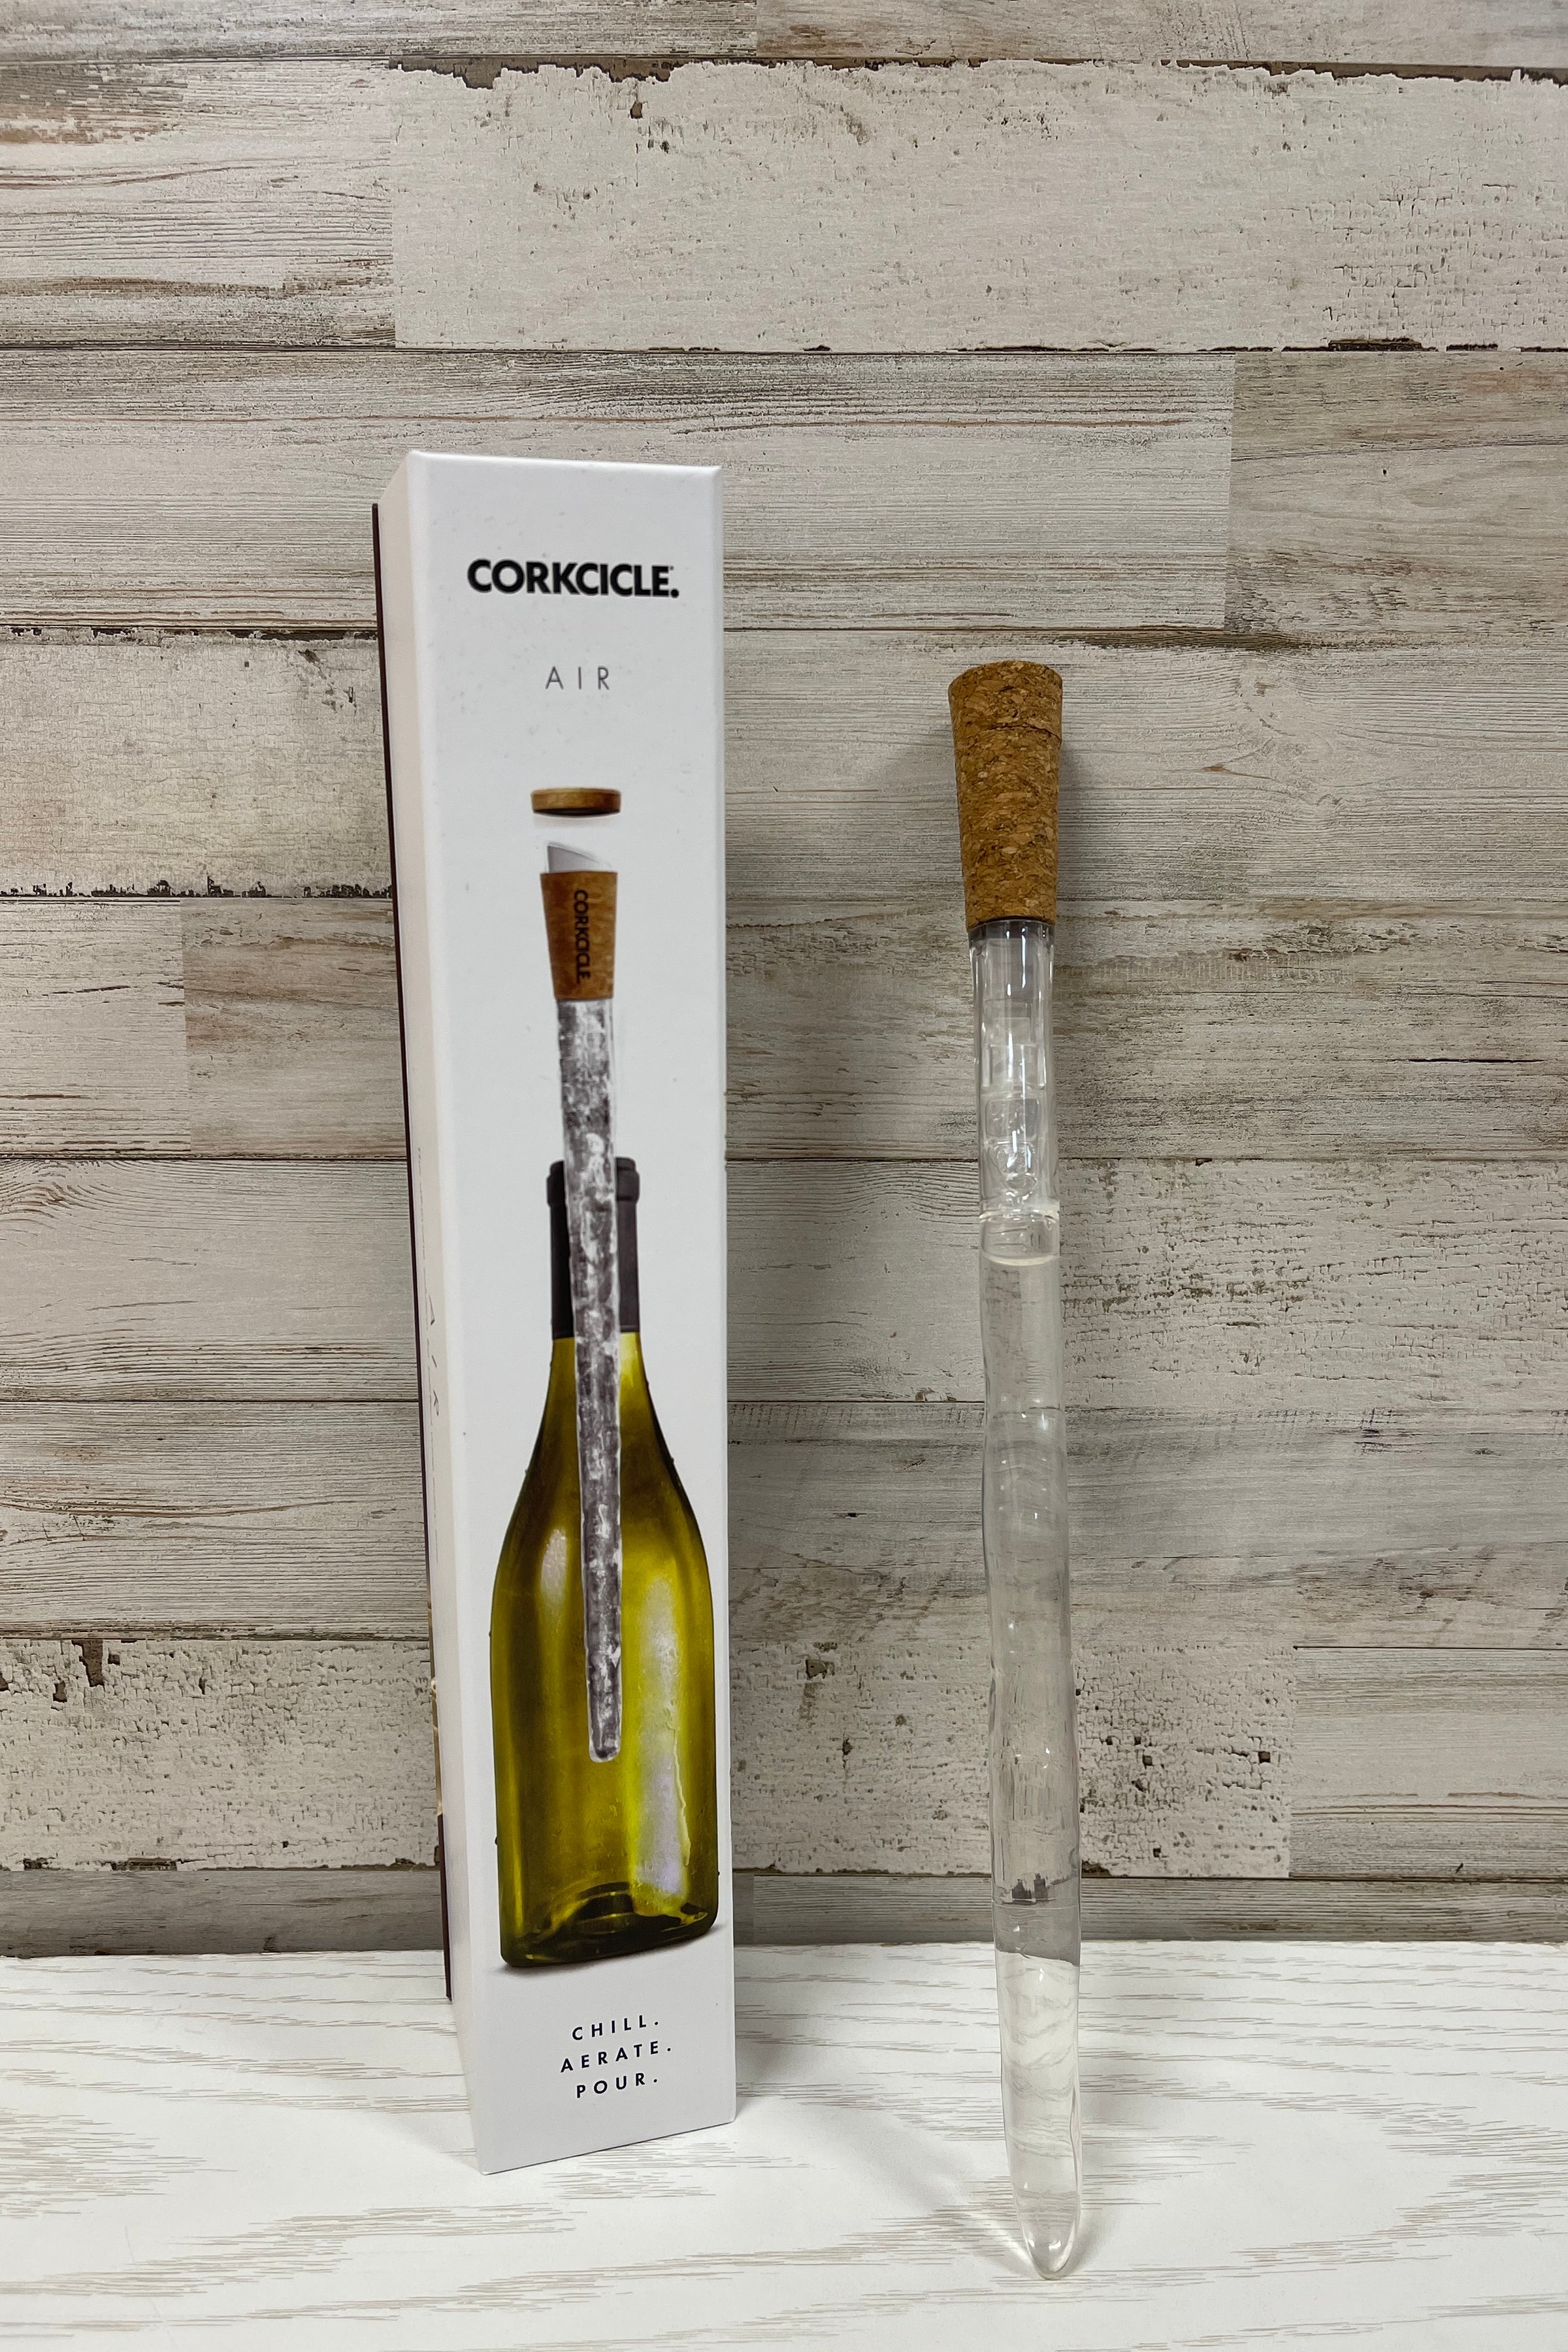 Zsa Zsa*s - ⭐️ Corkcicle Air *Chill, aerate, and pour ⭐️ Decapitator *Just  place on bottle, push down and pop it off!